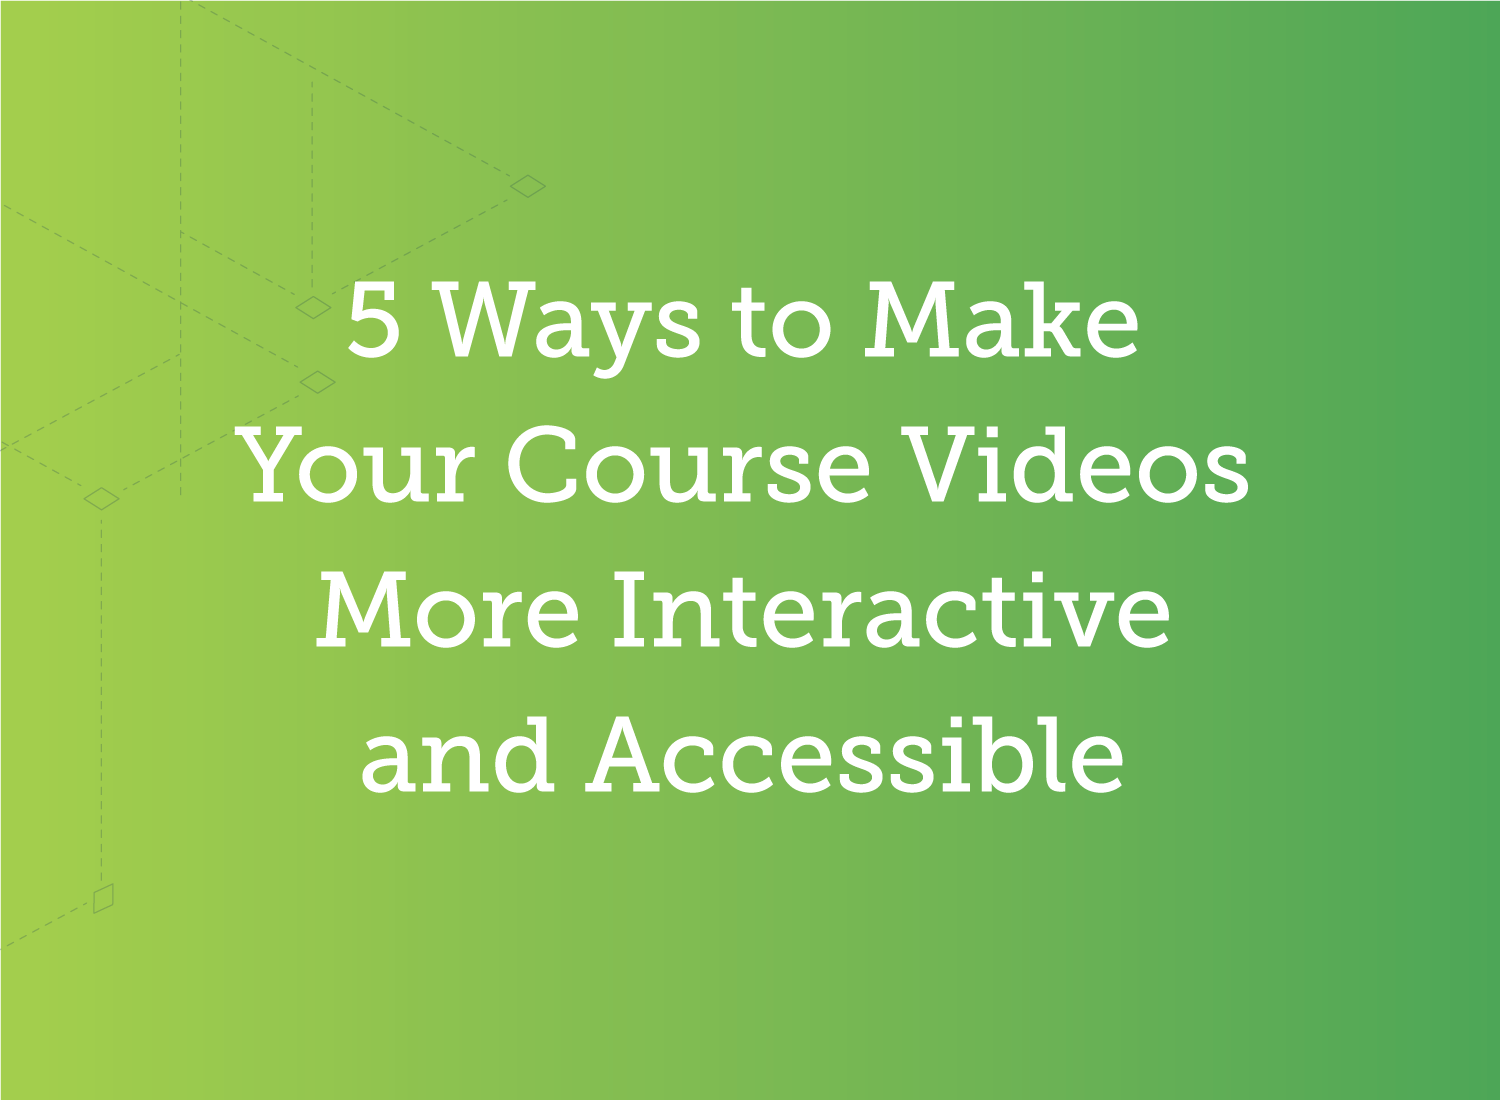 5 Ways to Make Your Course Videos More Interactive and Accessible